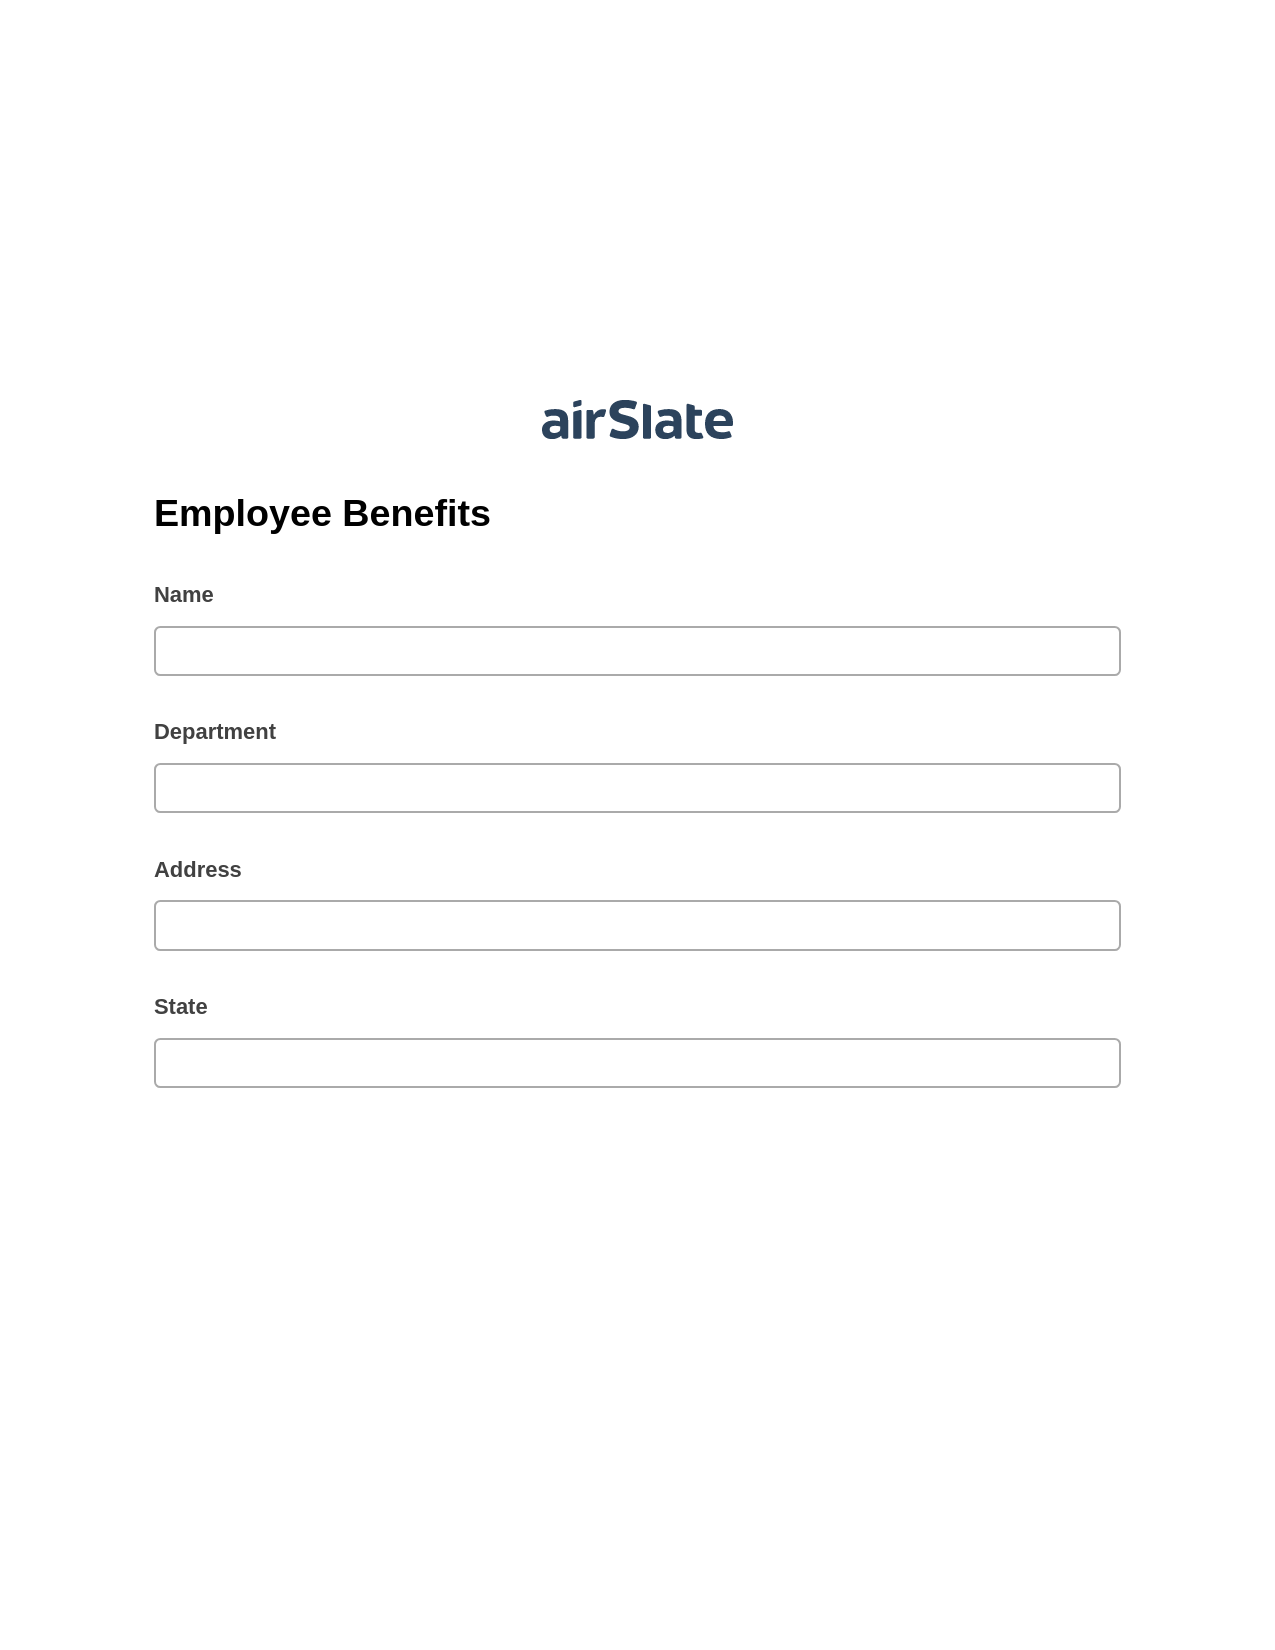 Multirole Employee Benefits Pre-fill from Salesforce Record Bot, Send a Slate to MS Dynamics 365 Contact Bot, Export to Excel 365 Bot